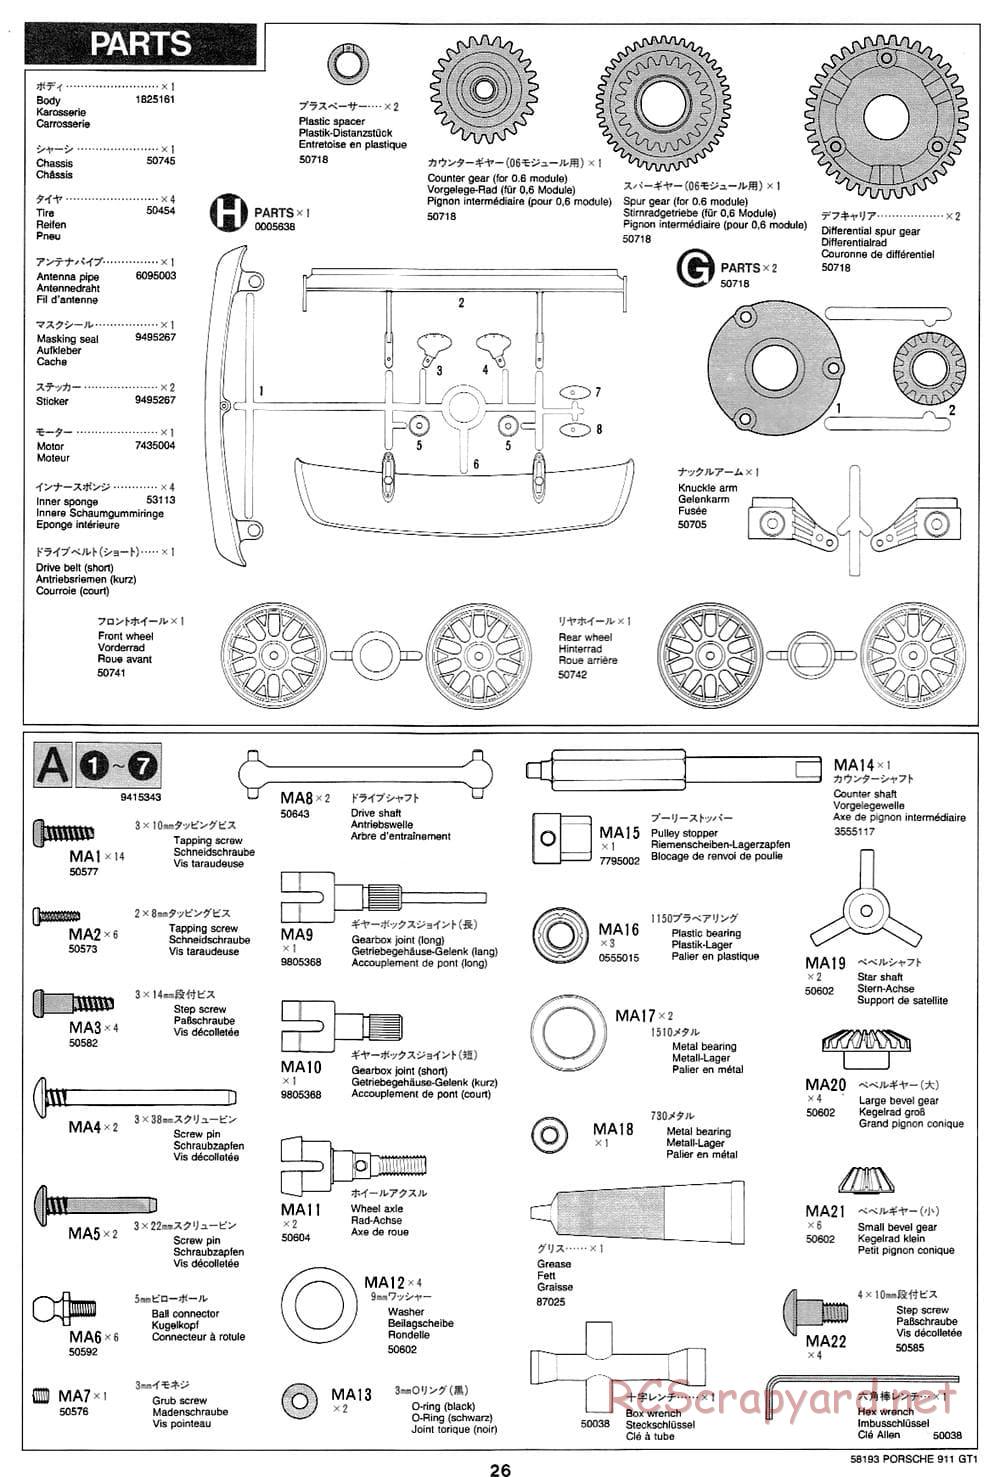 Tamiya - Porsche 911 GT1 - TA-03RS Chassis - Manual - Page 26